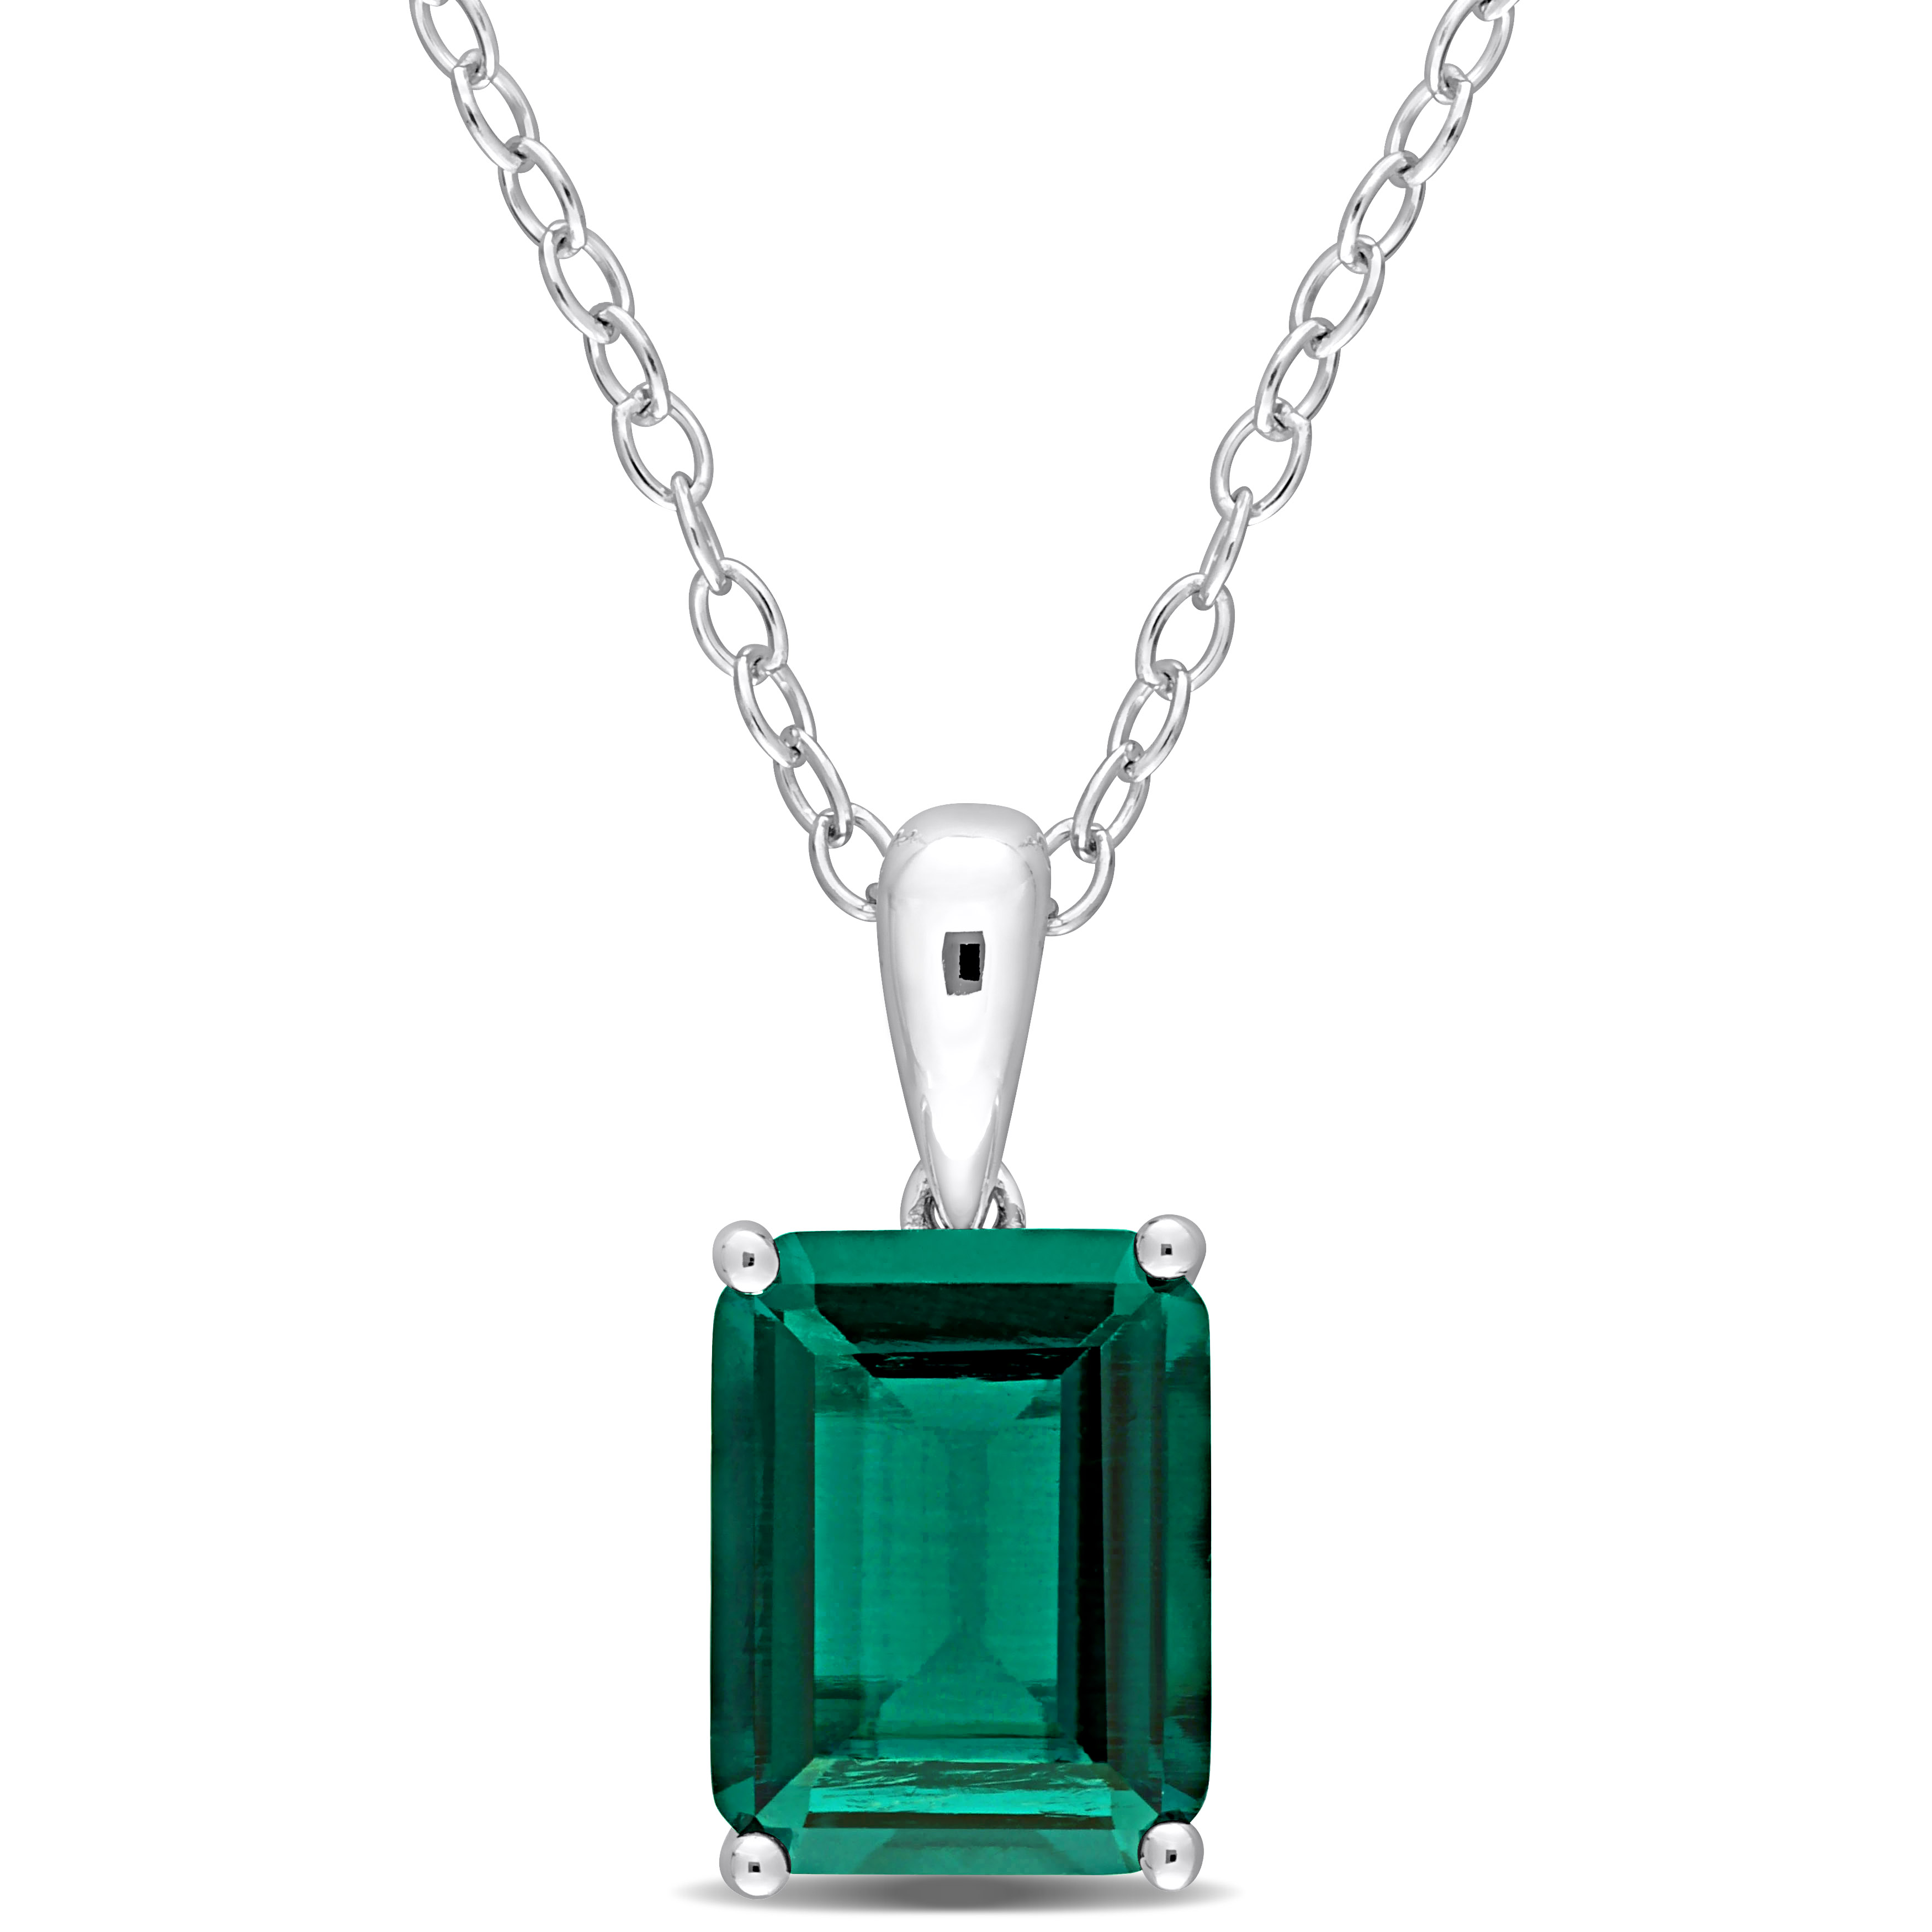 2 1/3 CT TGW Emerald Cut Created Emerald Solitaire Heart Design Pendant with Chain in Sterling Silver - 18 in.